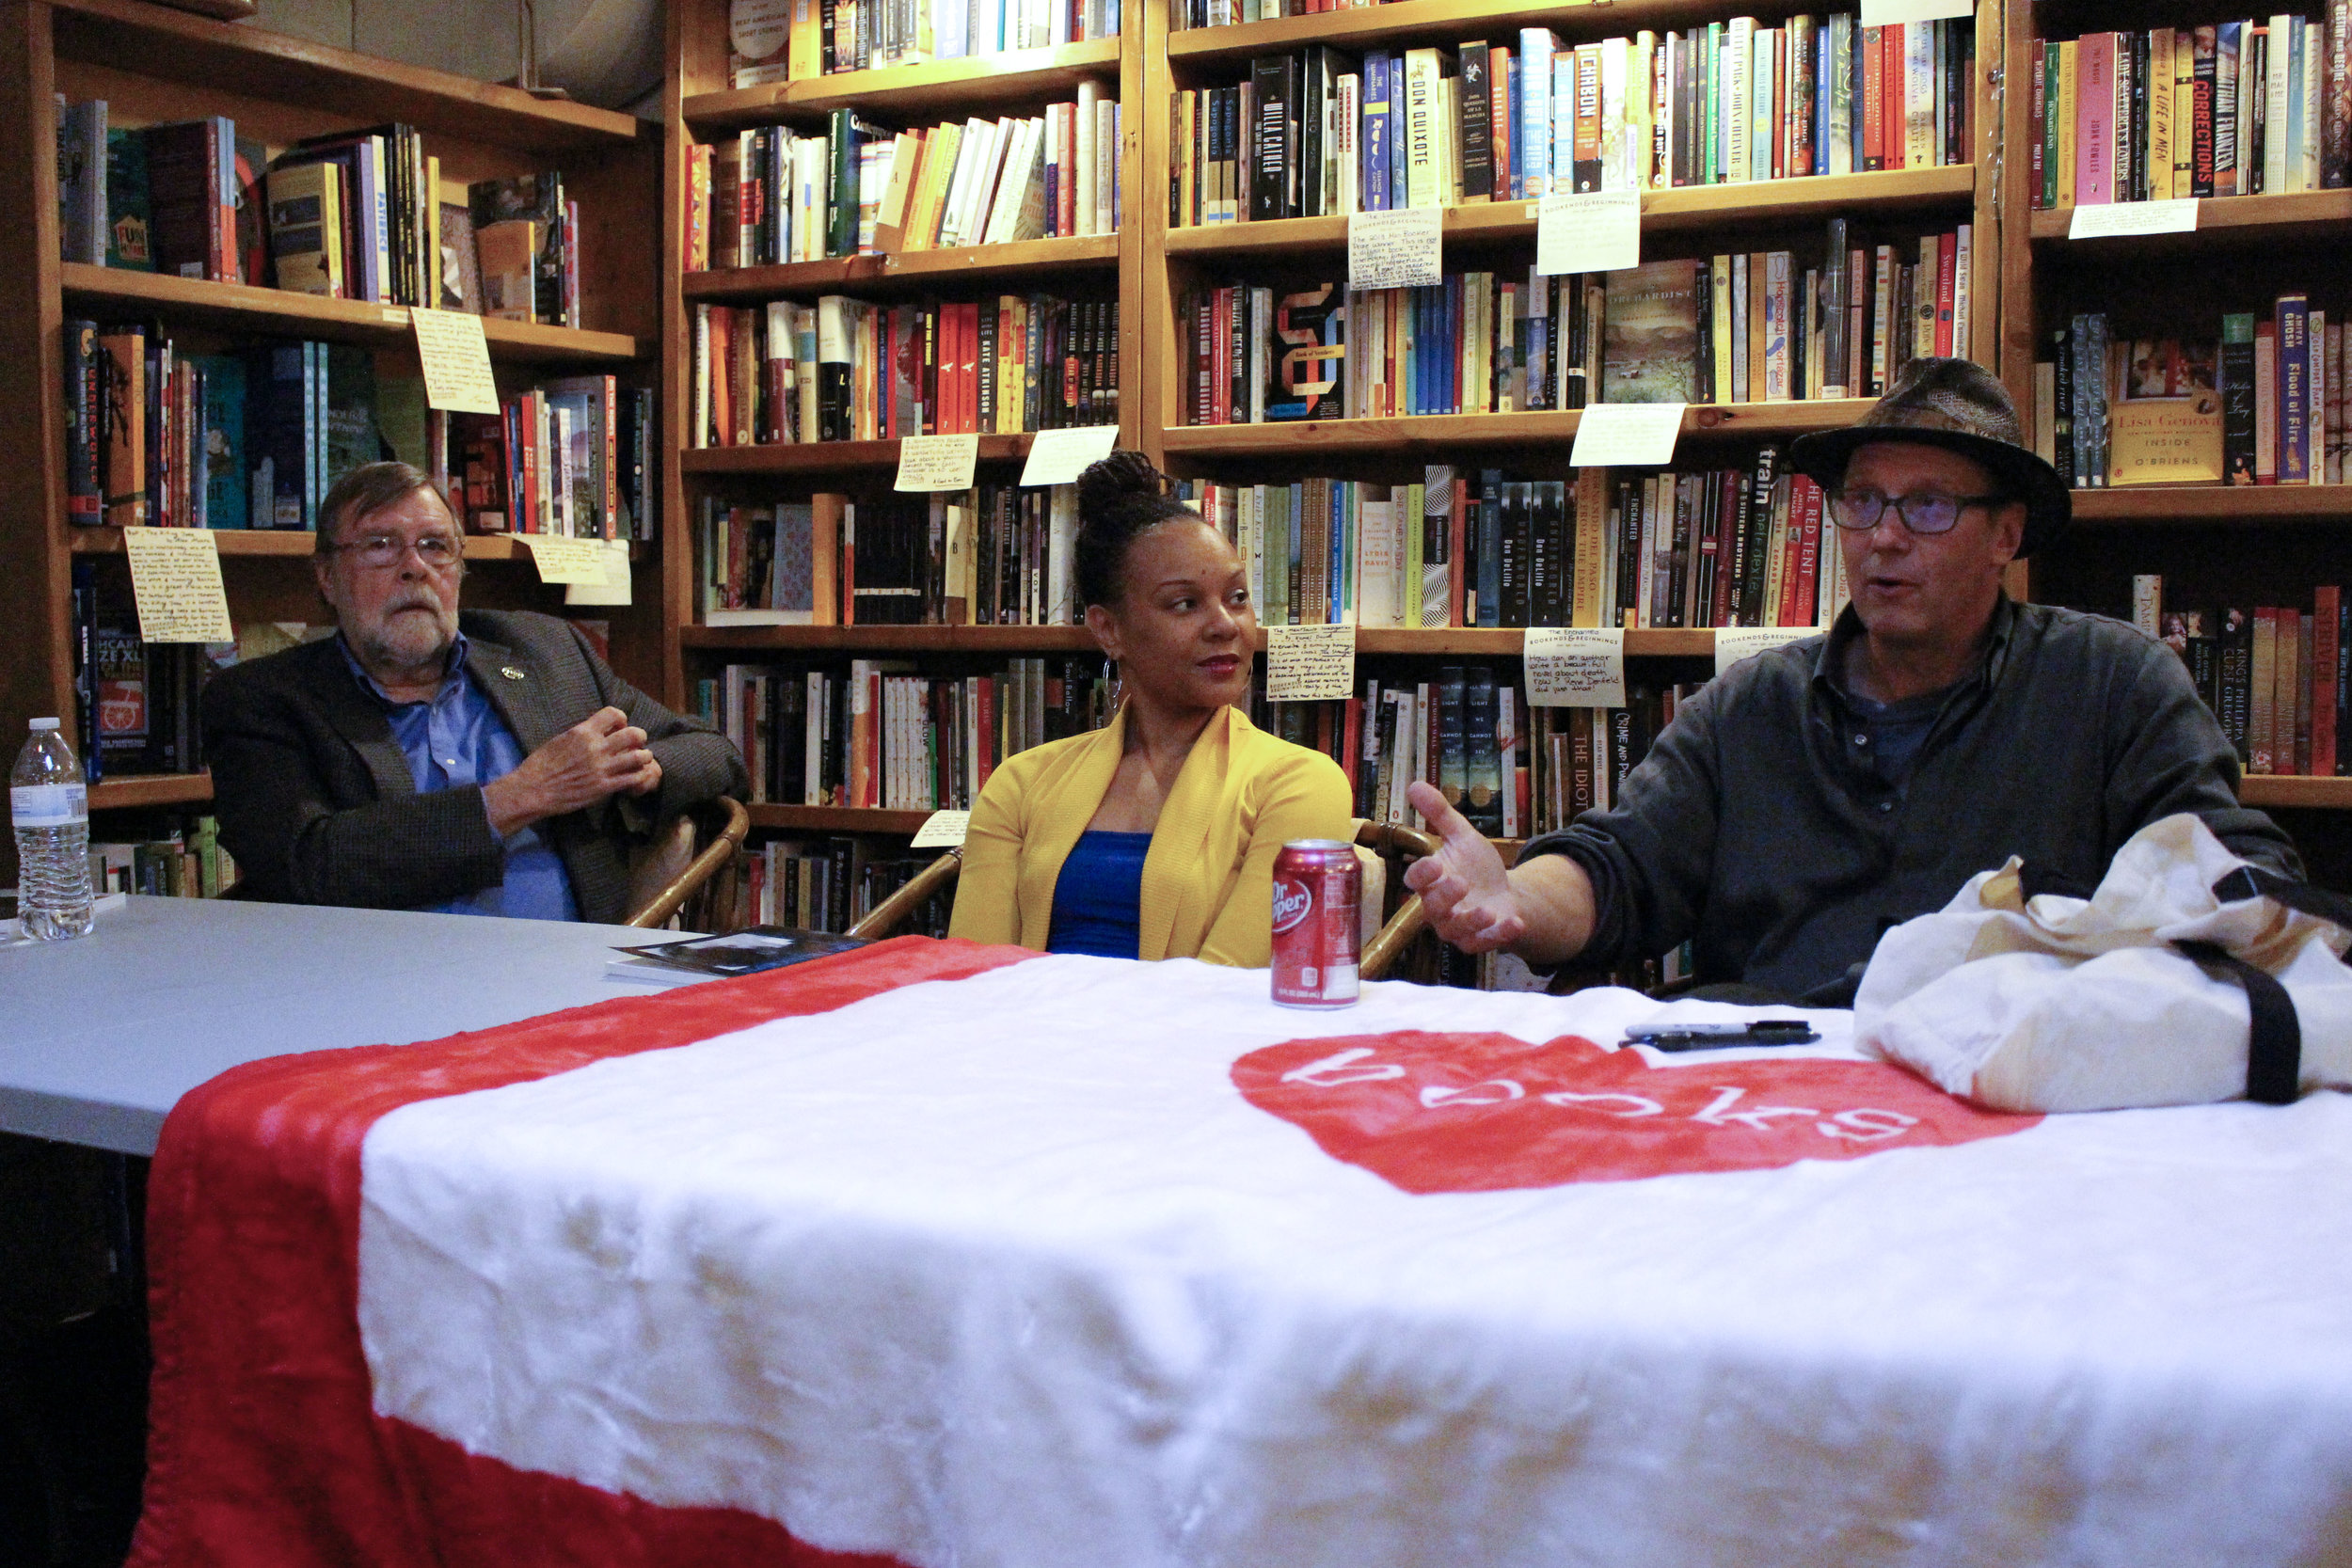 Michael Raleigh, Nambi E. Kelley, and Donald G. Evans at Bookends & Beginnings.